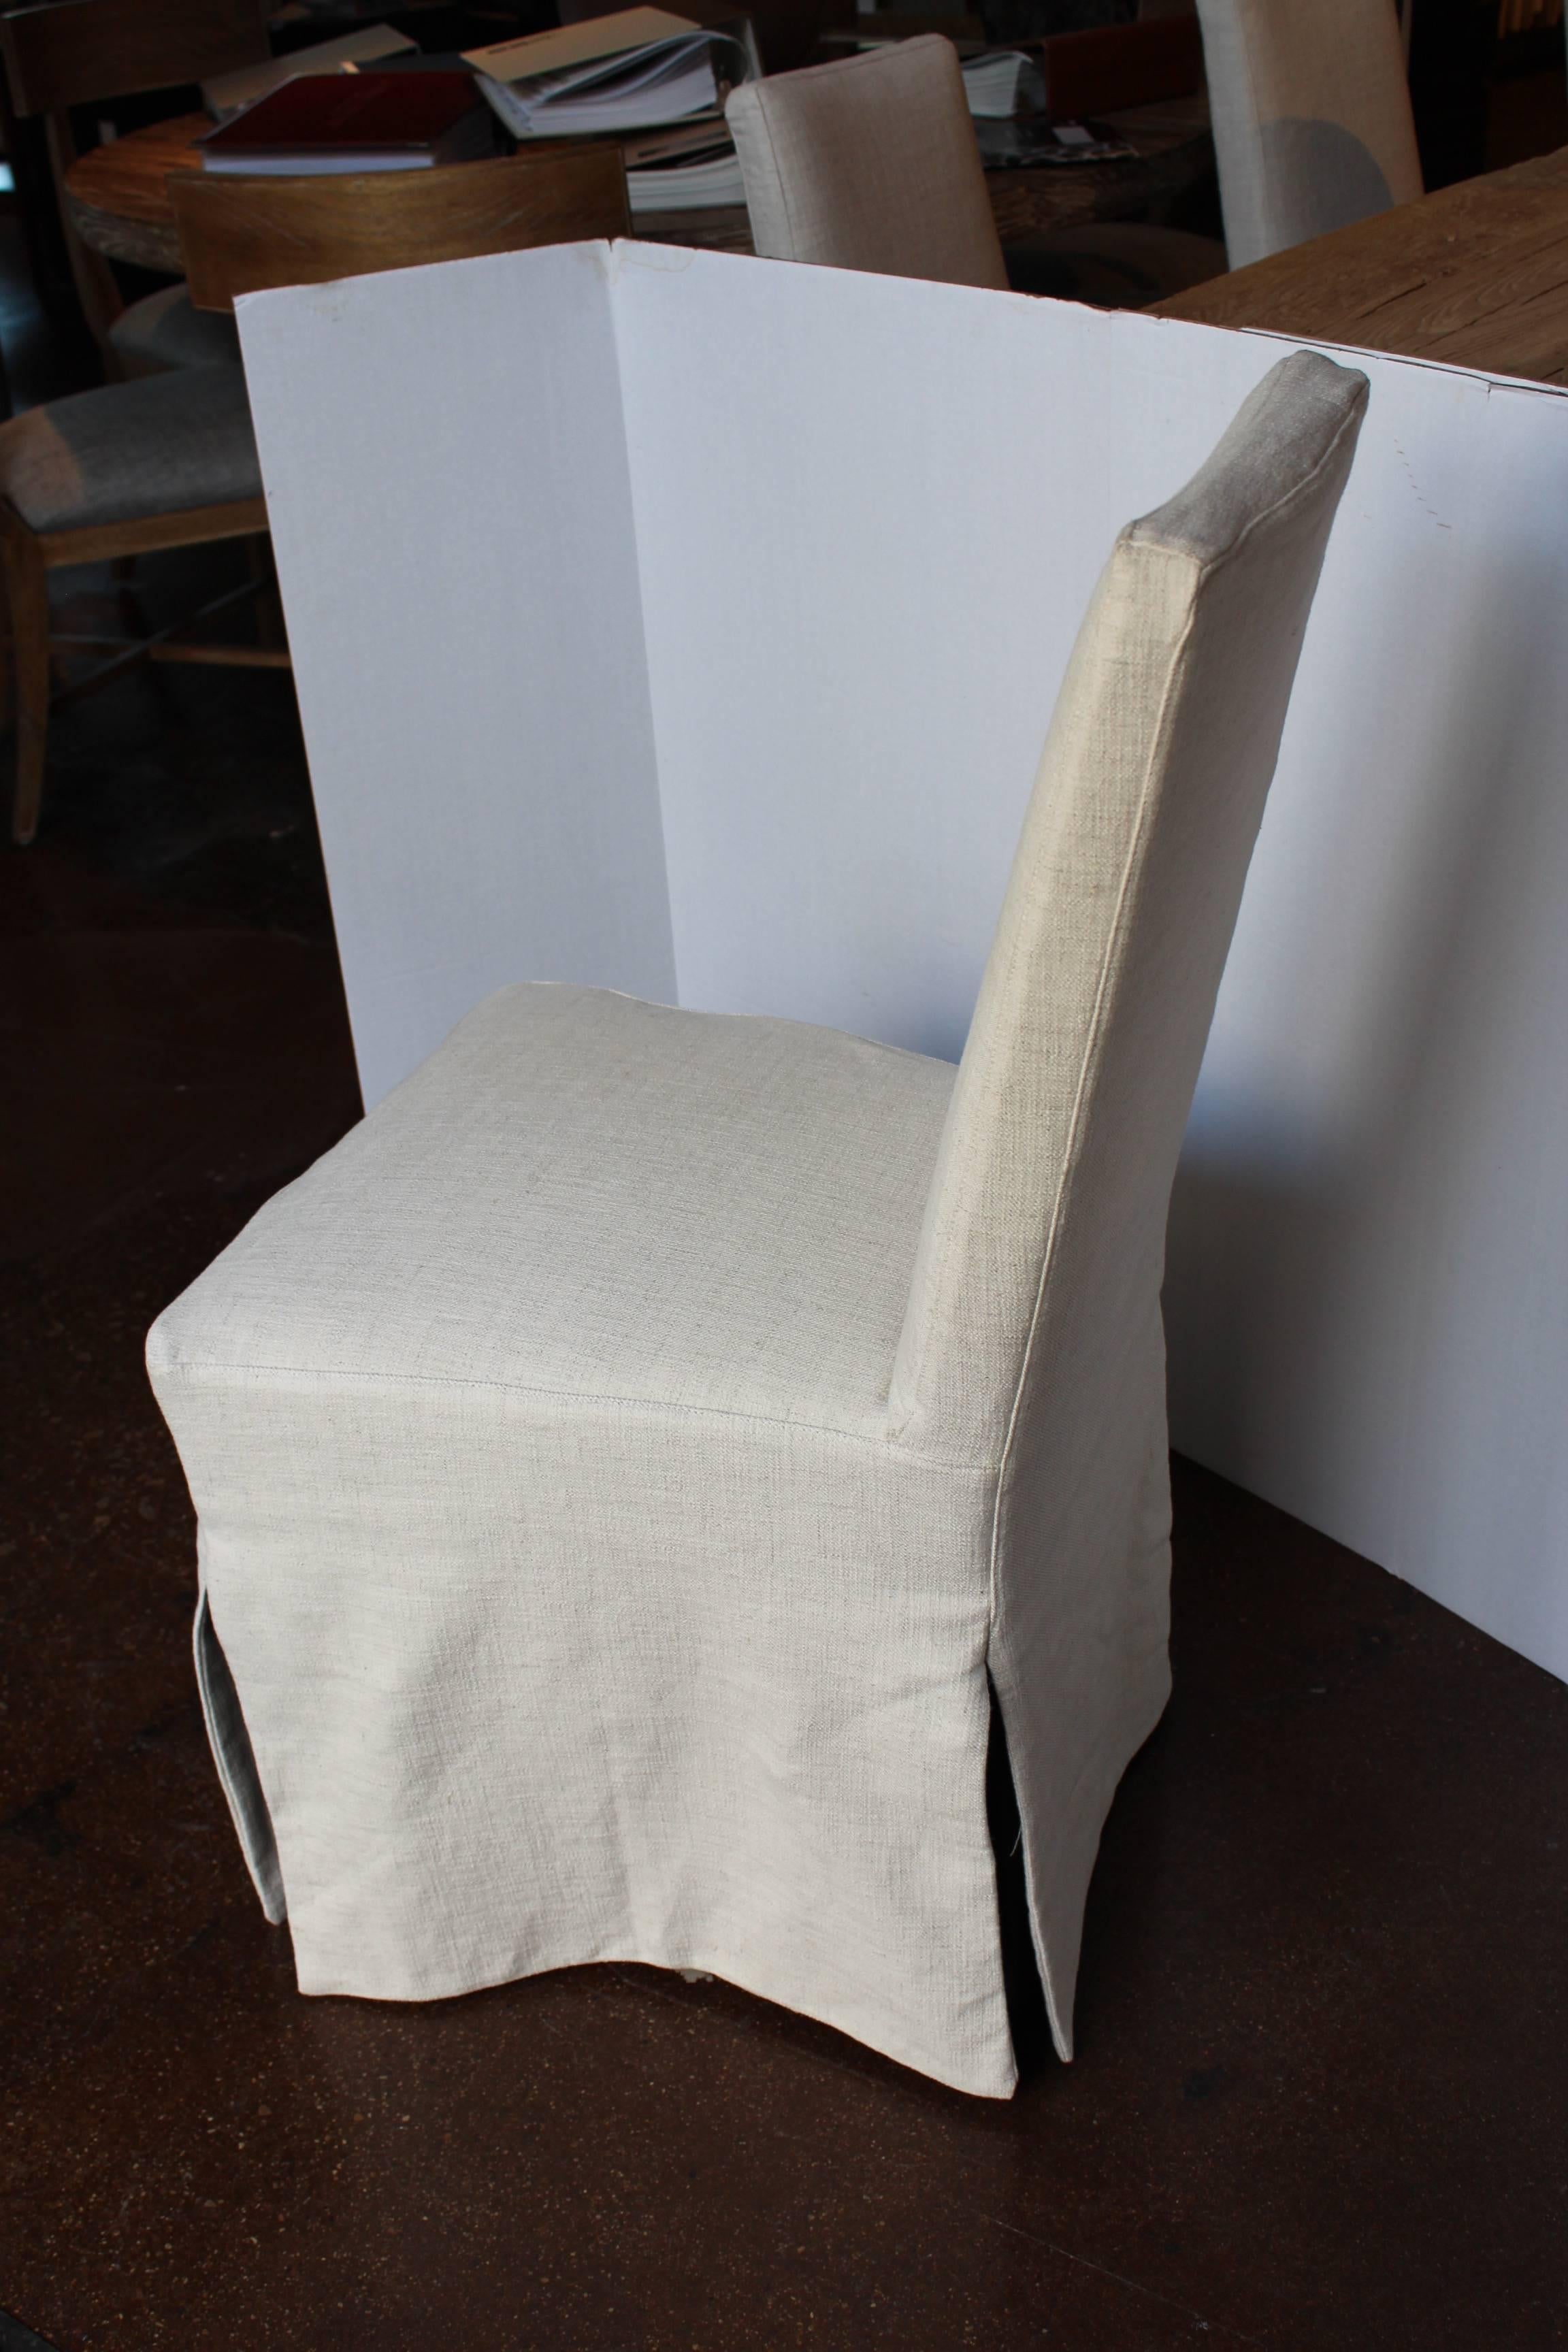 White slip cover dining chairs.
Brand: Lee.
Fabric: Smith natural.
Chair legs: Black walnut.
Eight chairs available.
Sold separately.